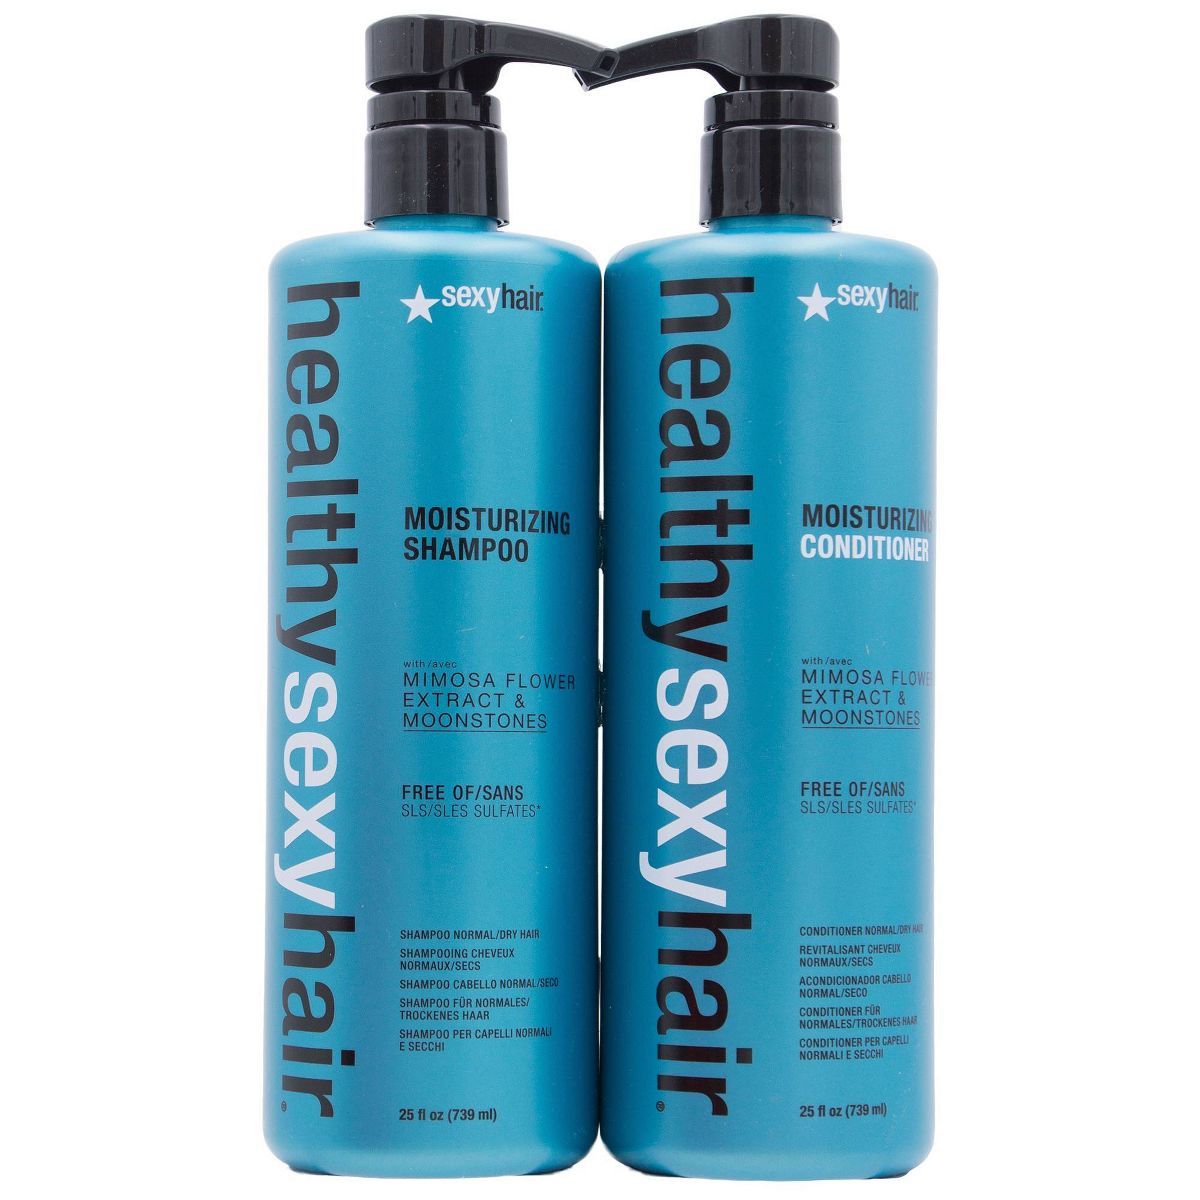 Sexy Hair Moisturizing Shampoo and Conditioner Duo Pack - 50 fl oz | Target